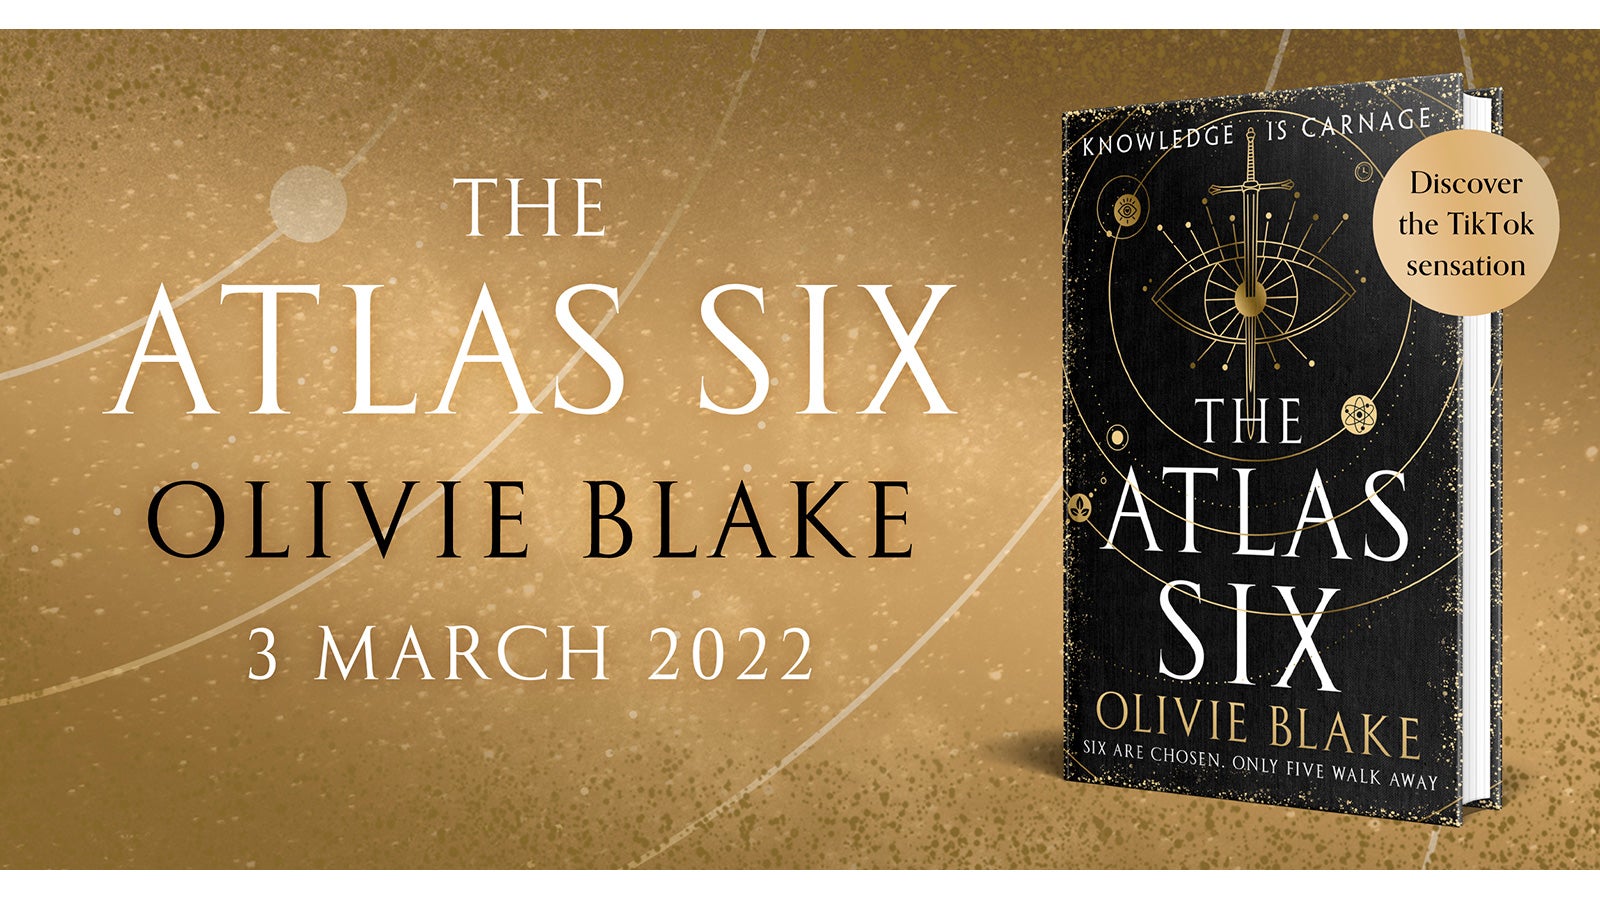 A promotional poster for The Atlas Six by Olivie Blake highlighting the publication day of 3 March 2022